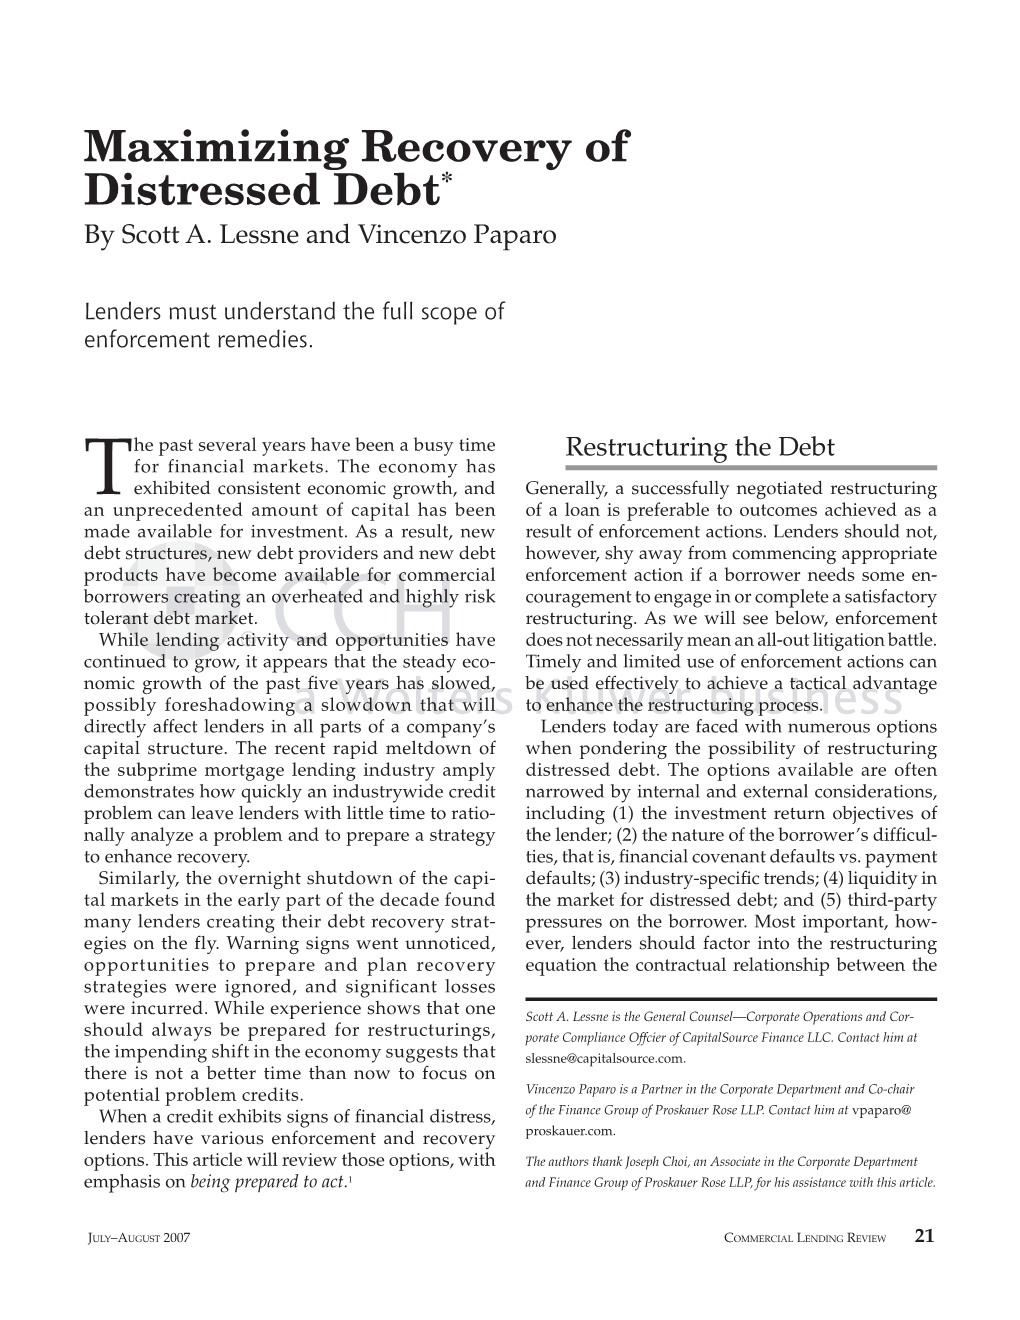 Maximizing Recovery of Distressed Debt* by Scott A